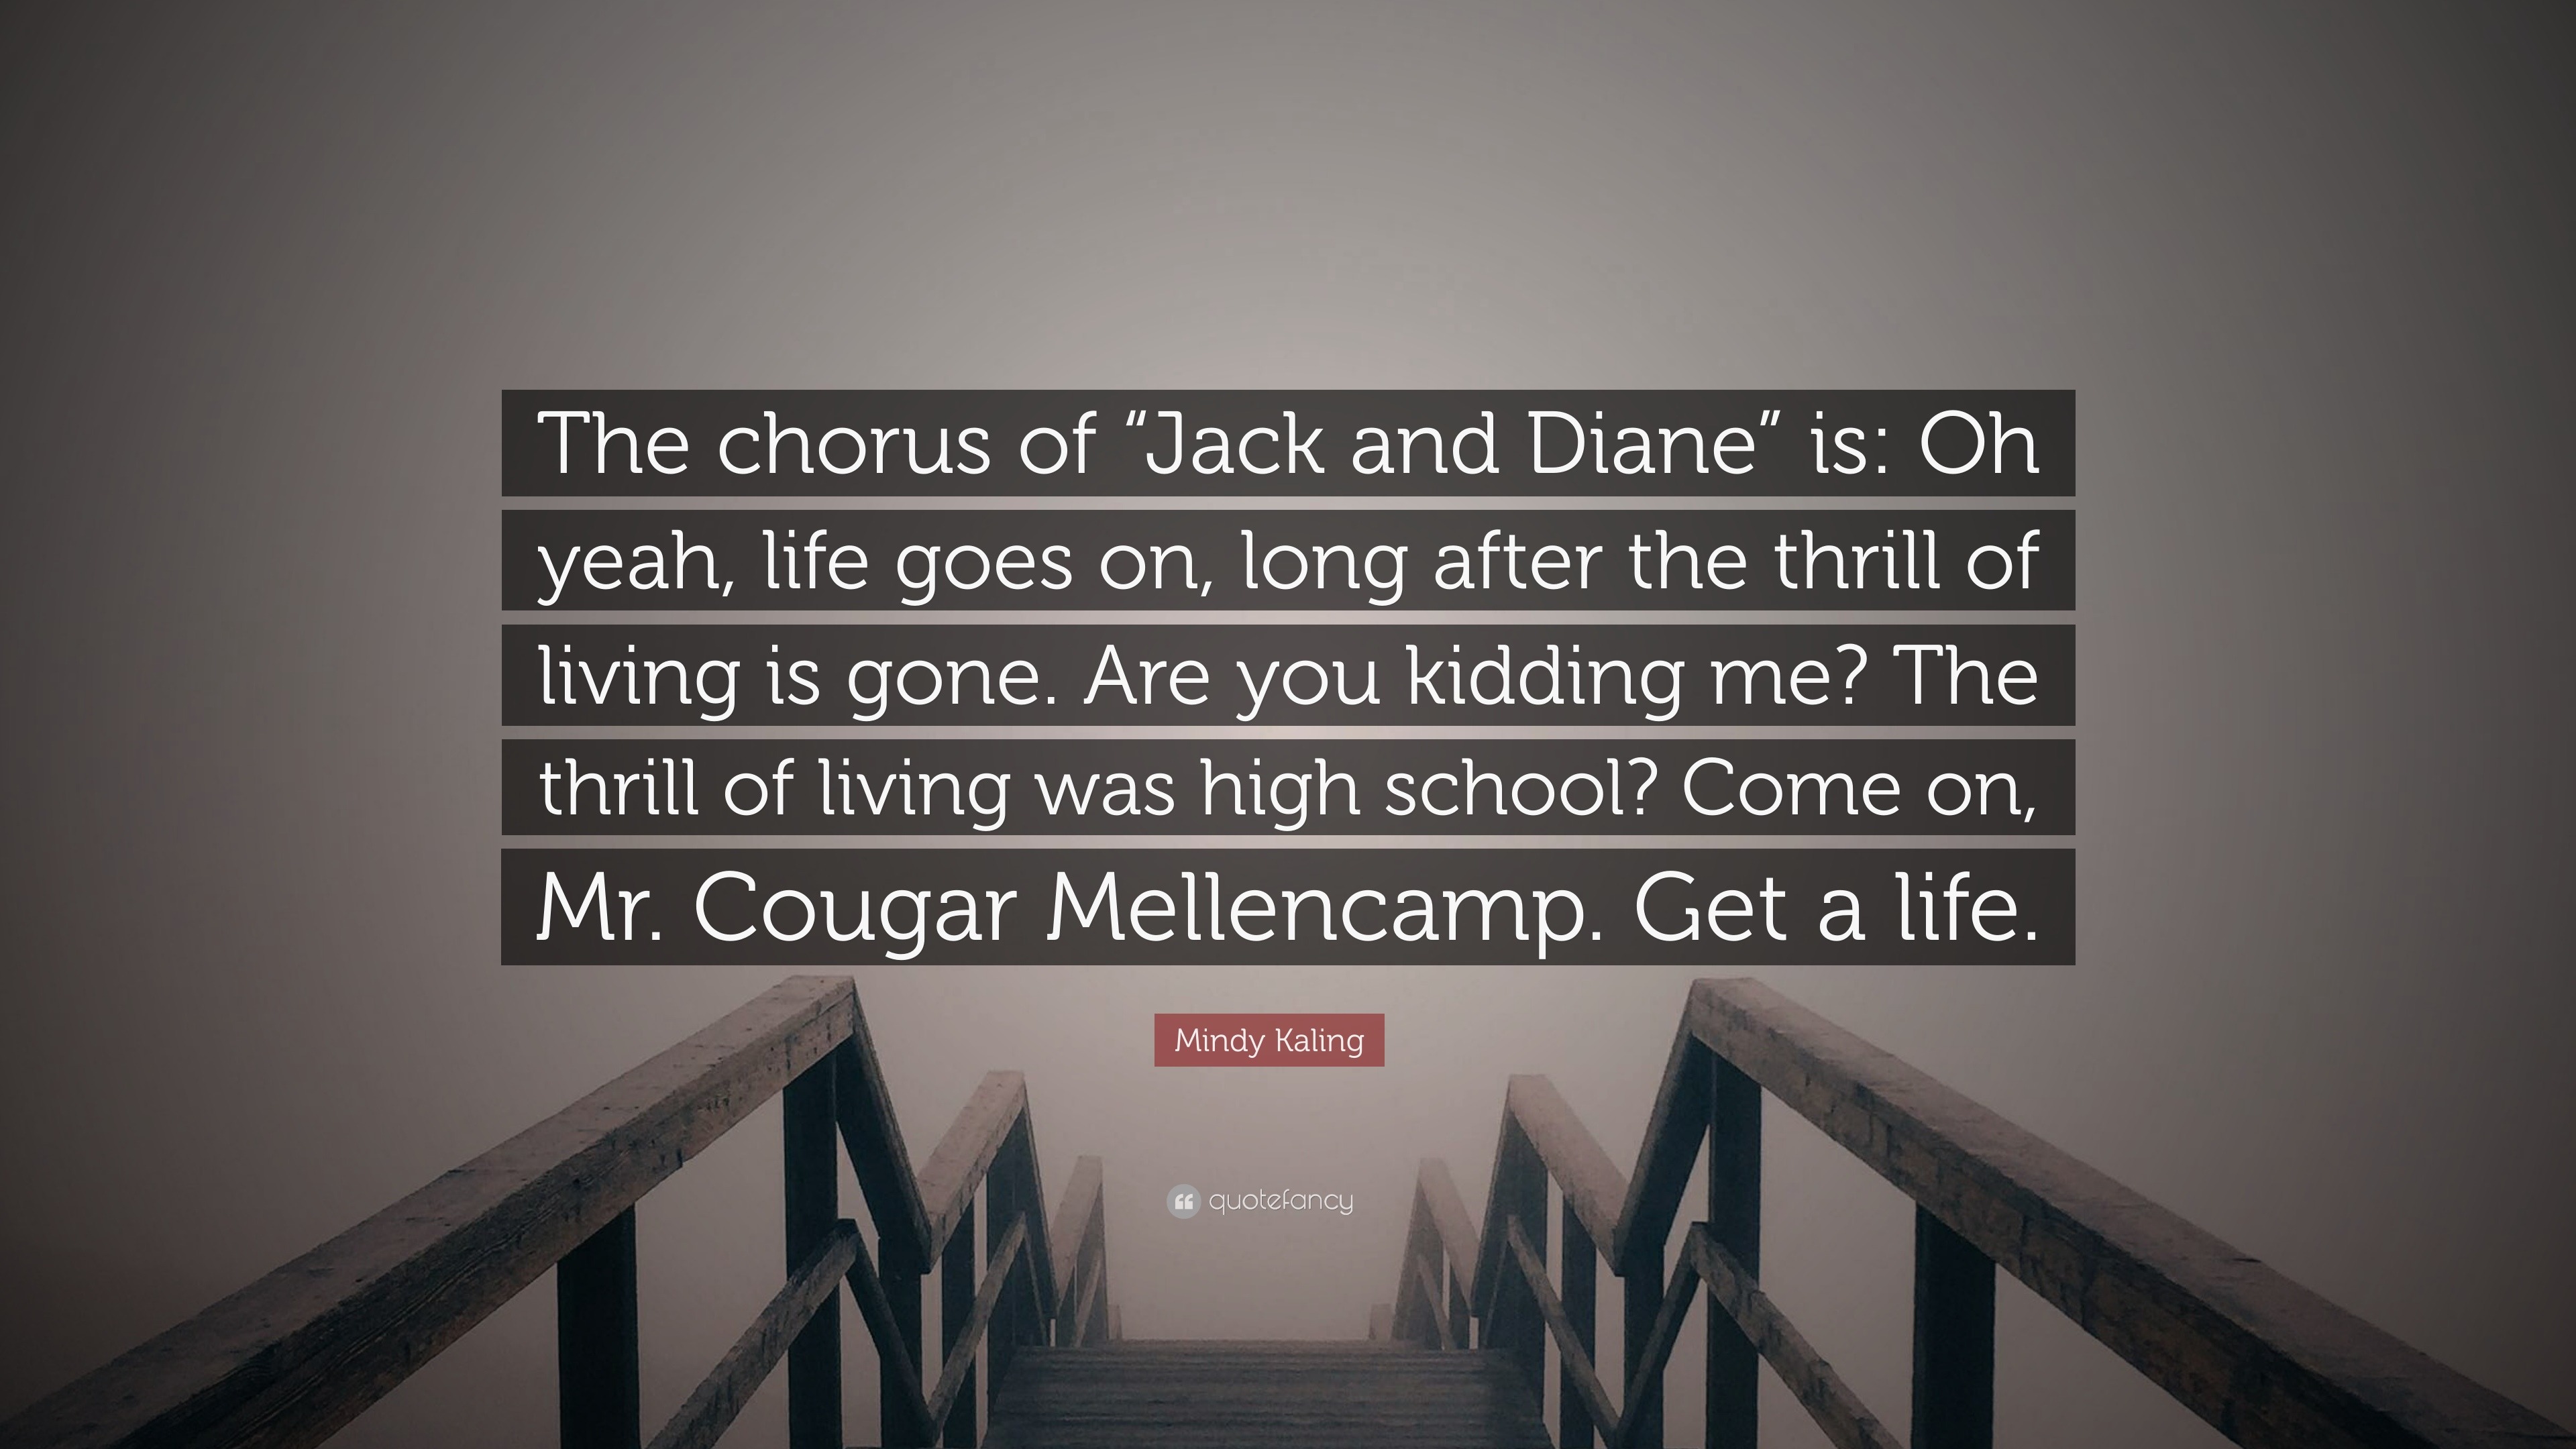 Mindy Kaling Quote “The chorus of “Jack and Diane” is Oh